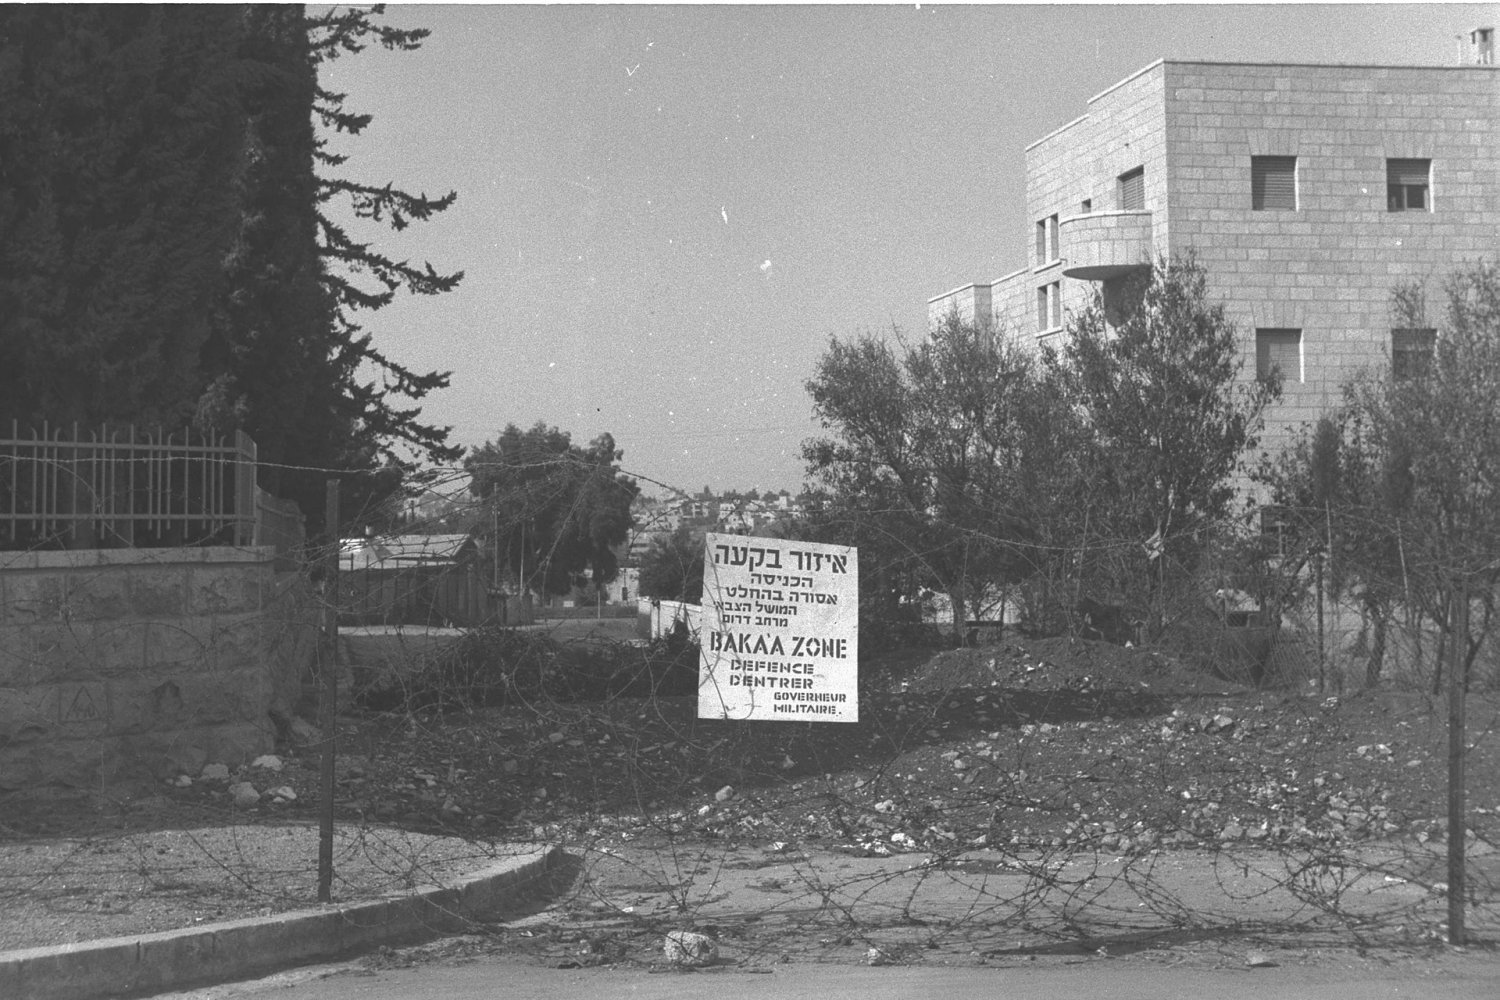 A sign marking the Baq‘a Zone, an area of Jerusalem restricted after 1948